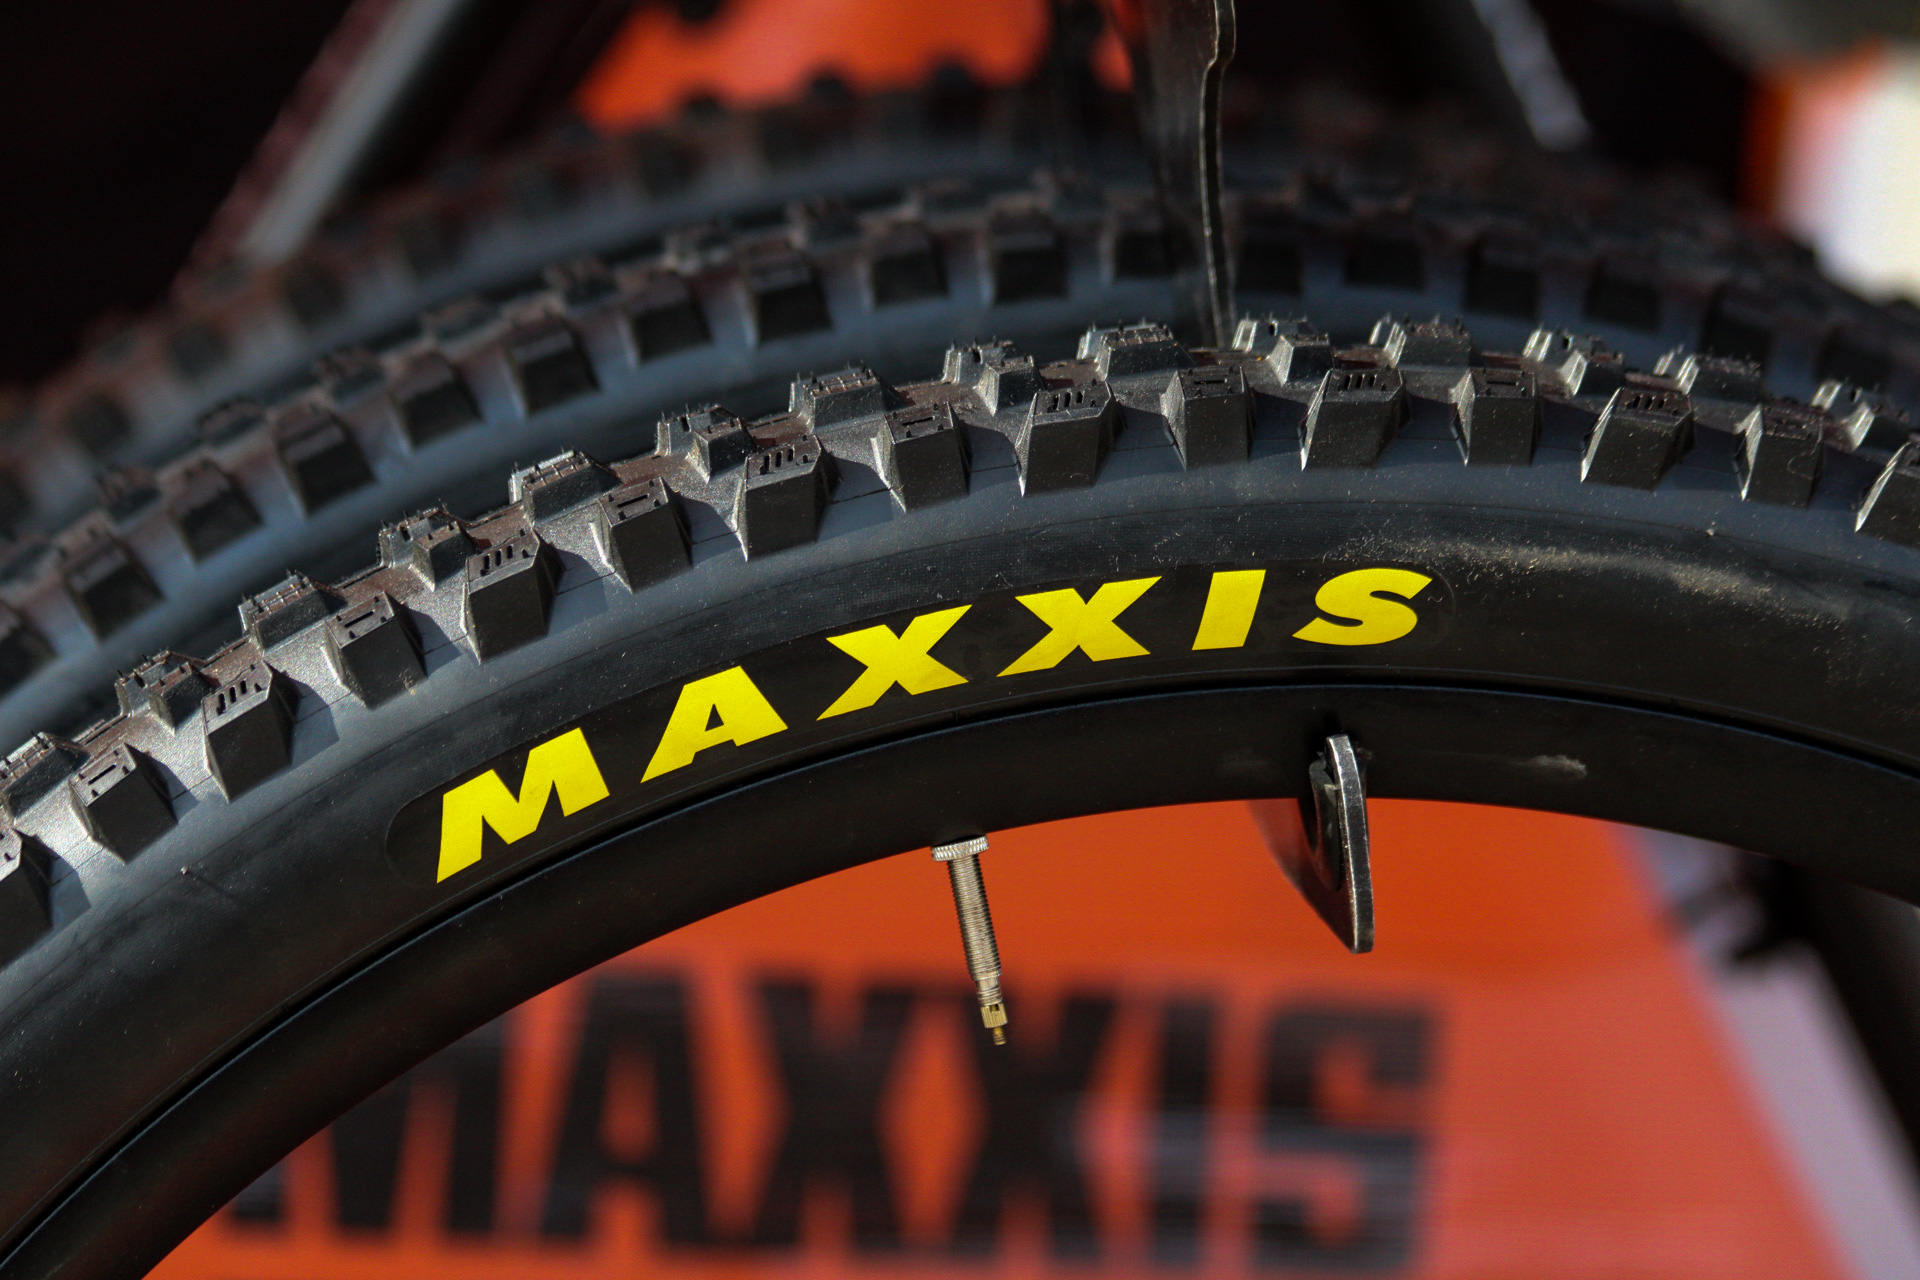 Maxxis tires displayed at an event